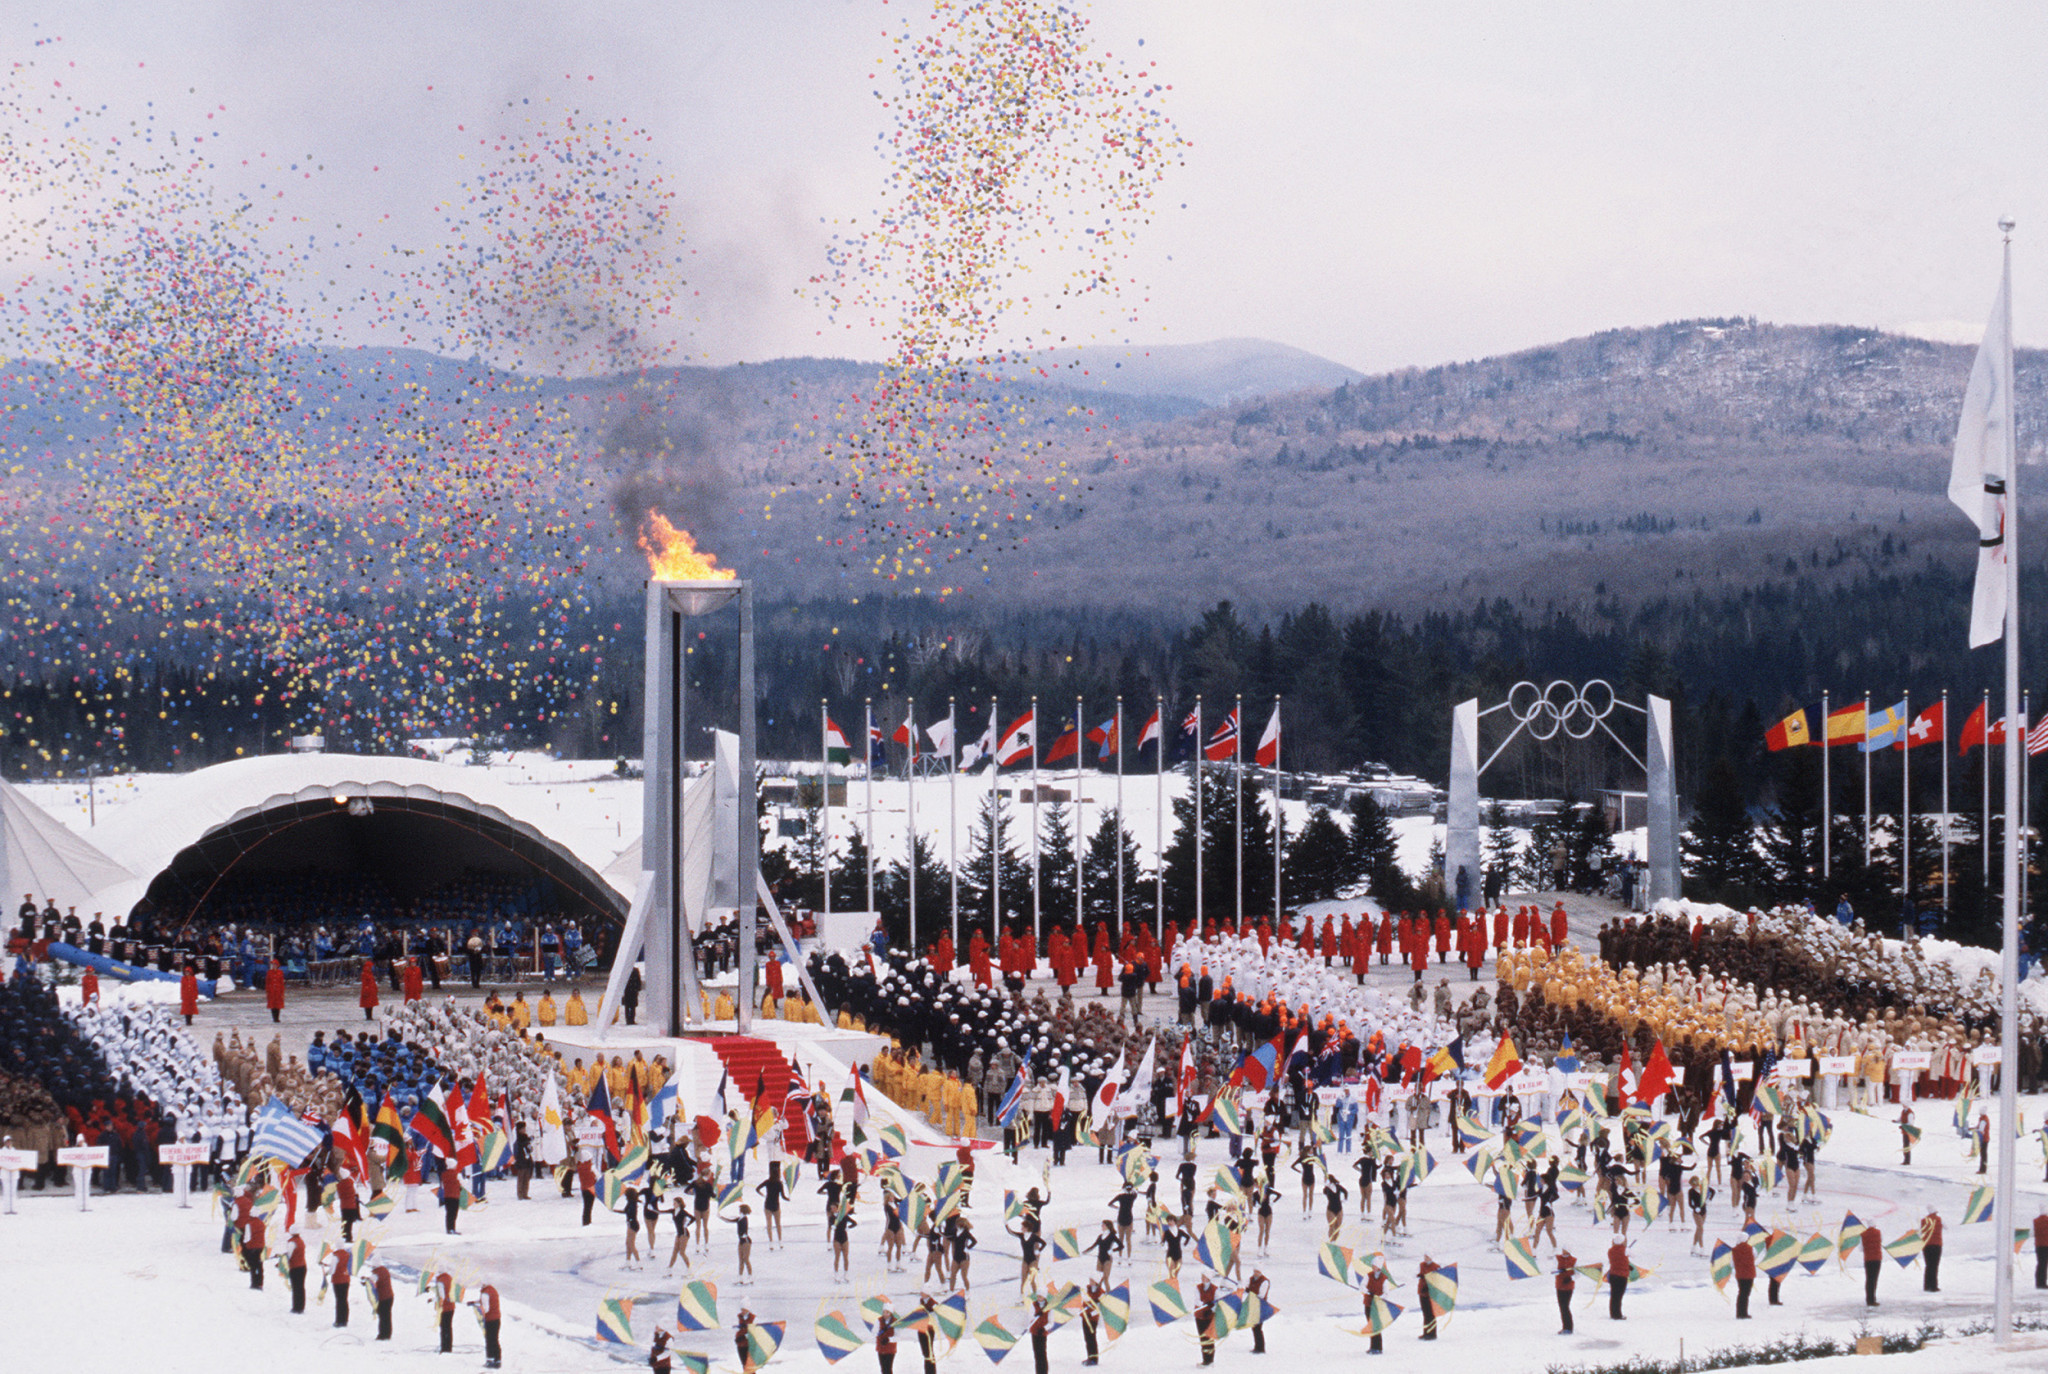 Lake Placid unlikely to hold Olympics again unless Paris Agreement goals met